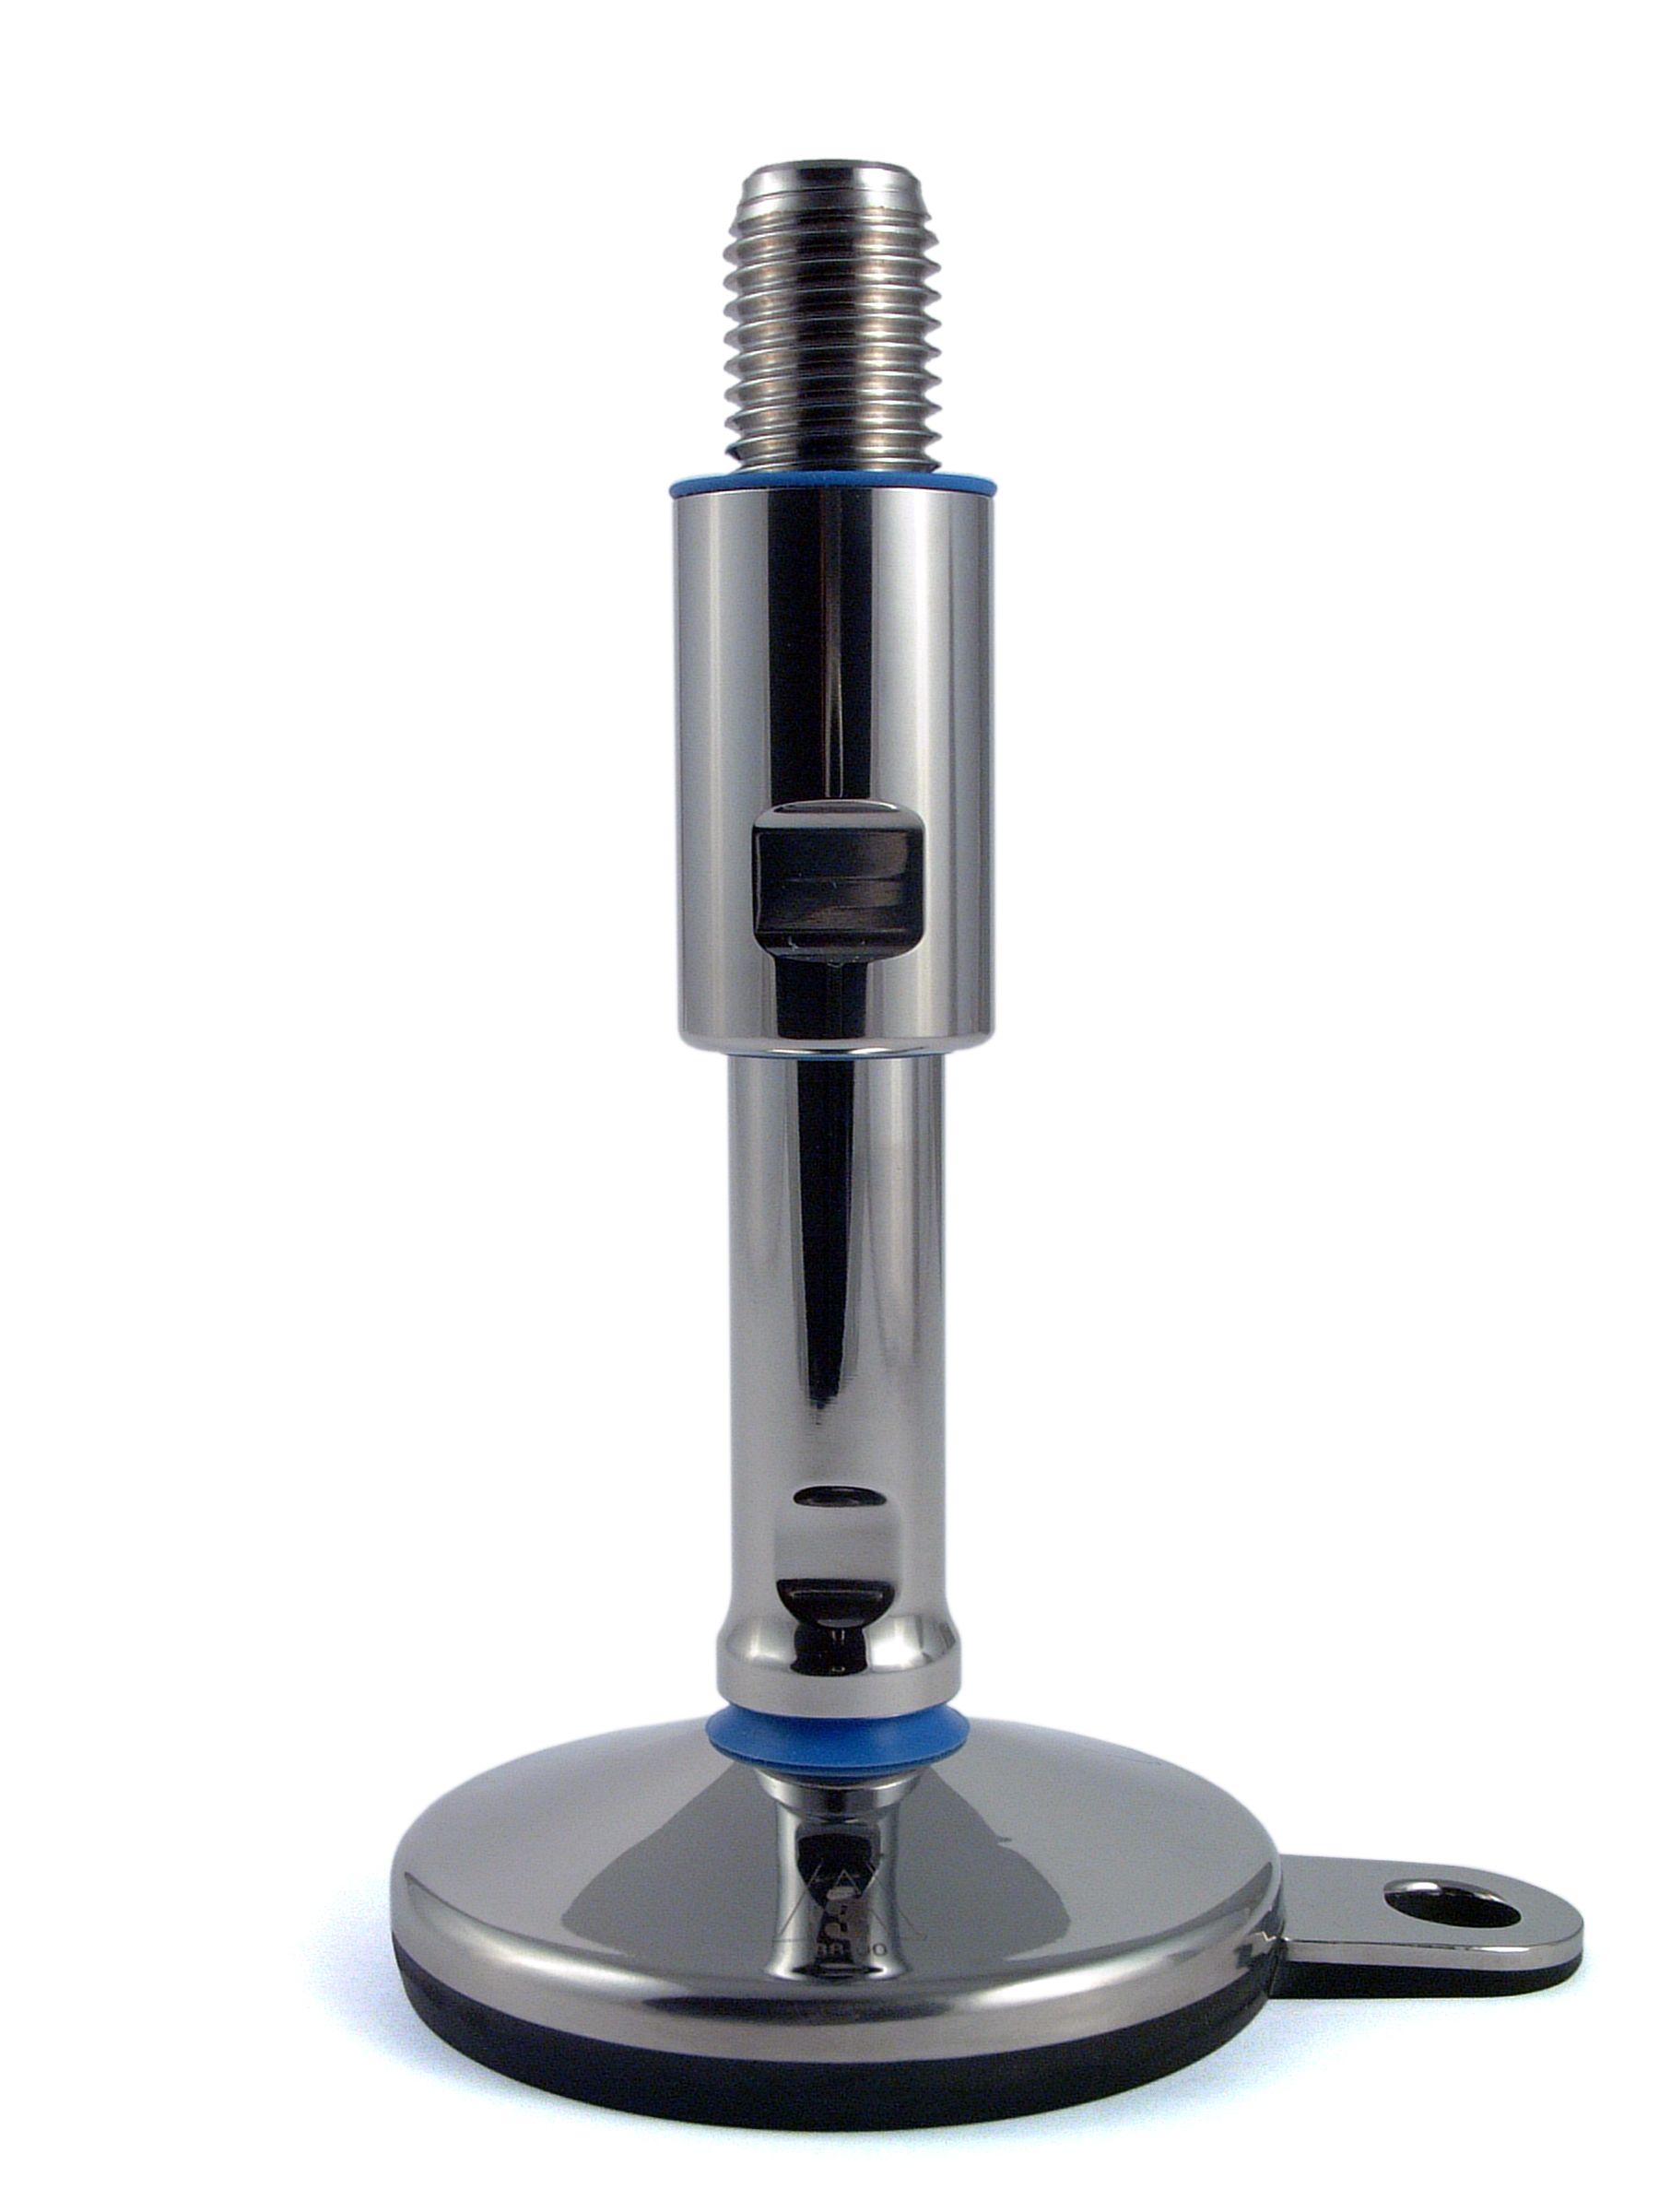 RS PRO M20 Stainless Steel Hygienic Adjustable Foot, 2000kg Static Load Capacity 15° Tilt Angle